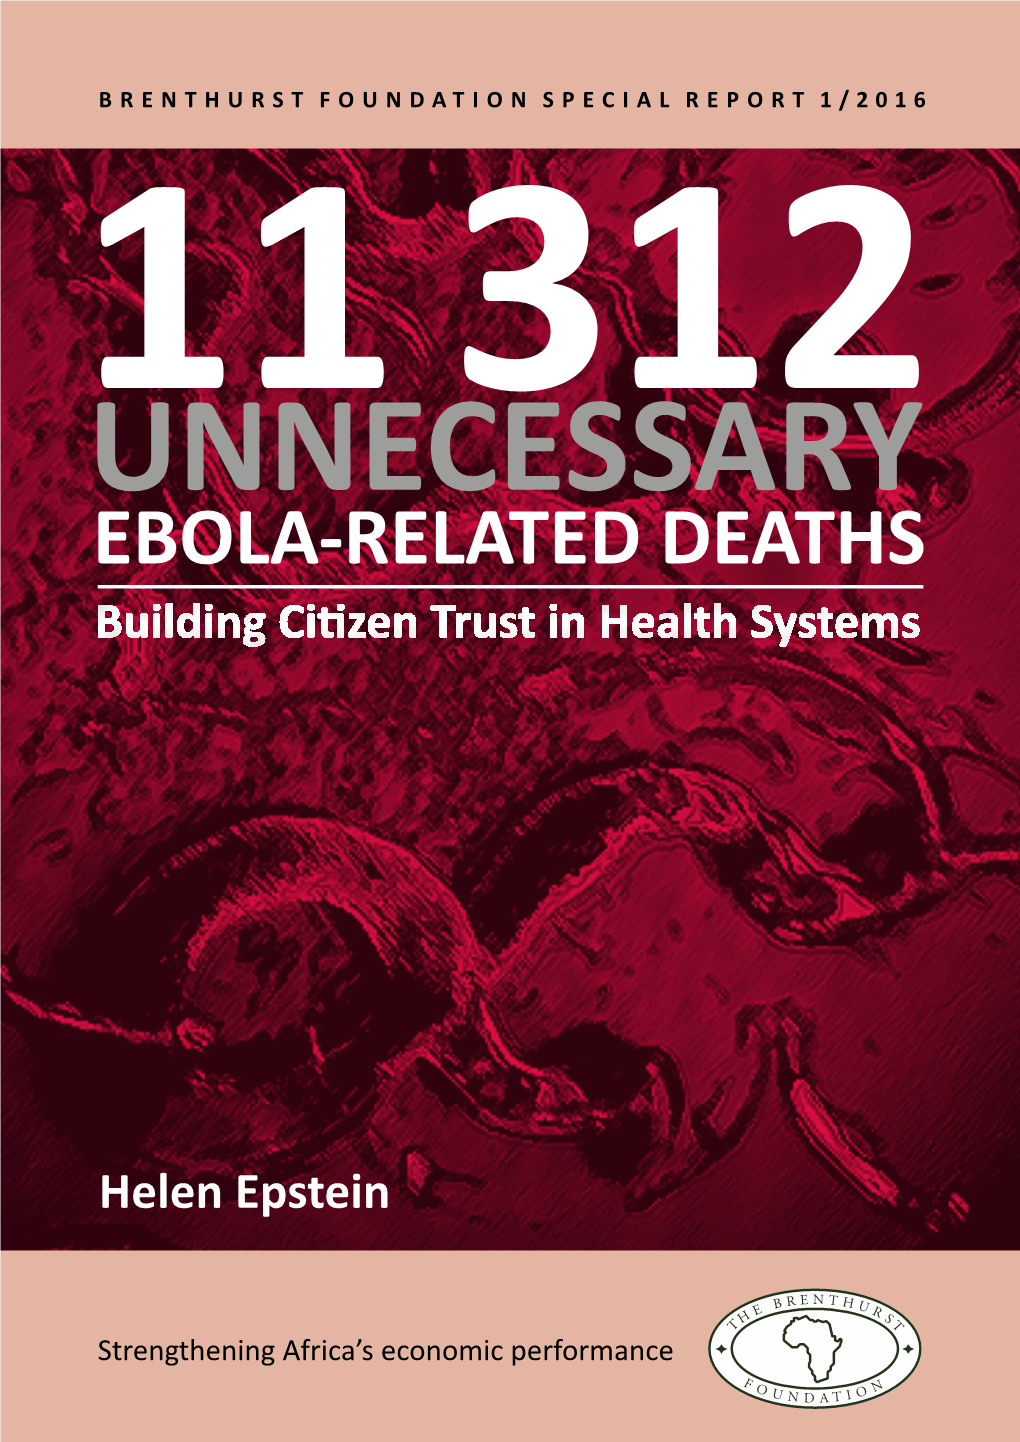 EBOLA-RELATED DEATHS Building Citizen Trust in Health Systems